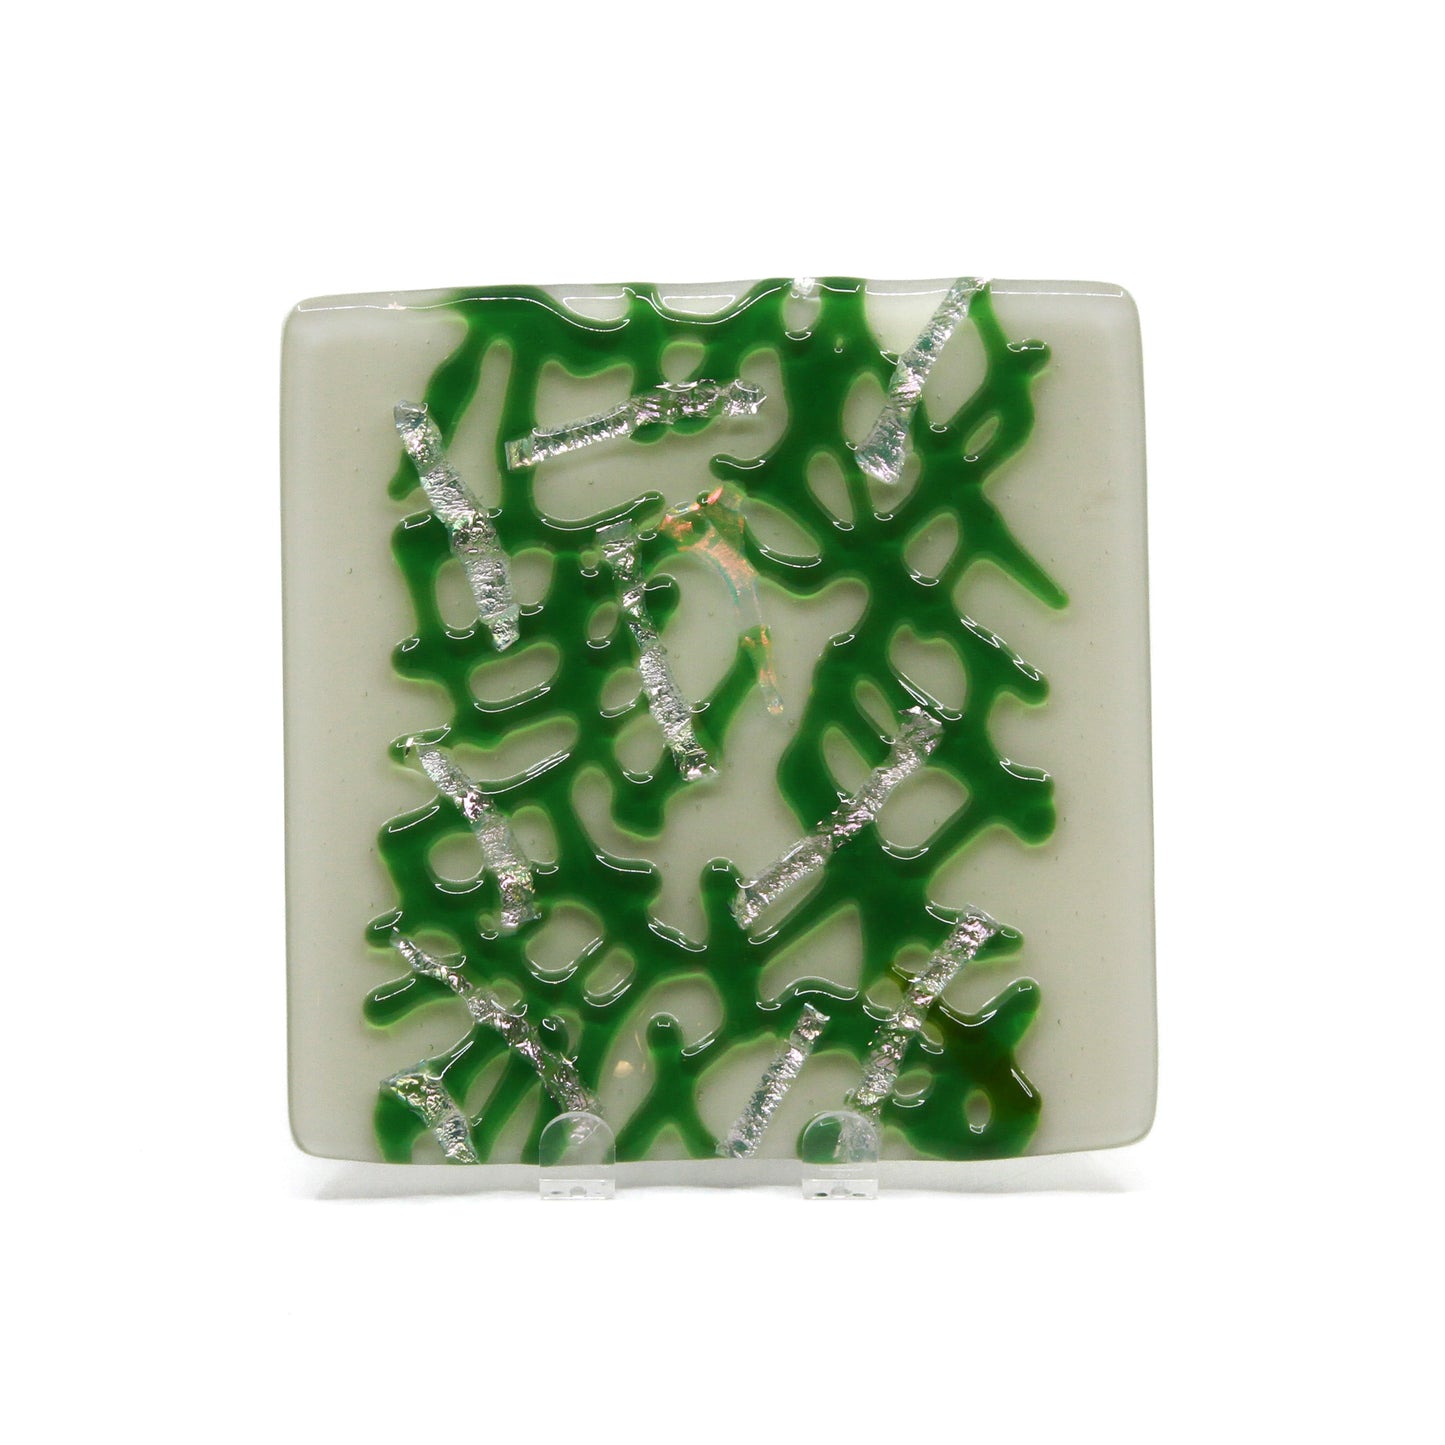 Pale Ivory & Green Plate